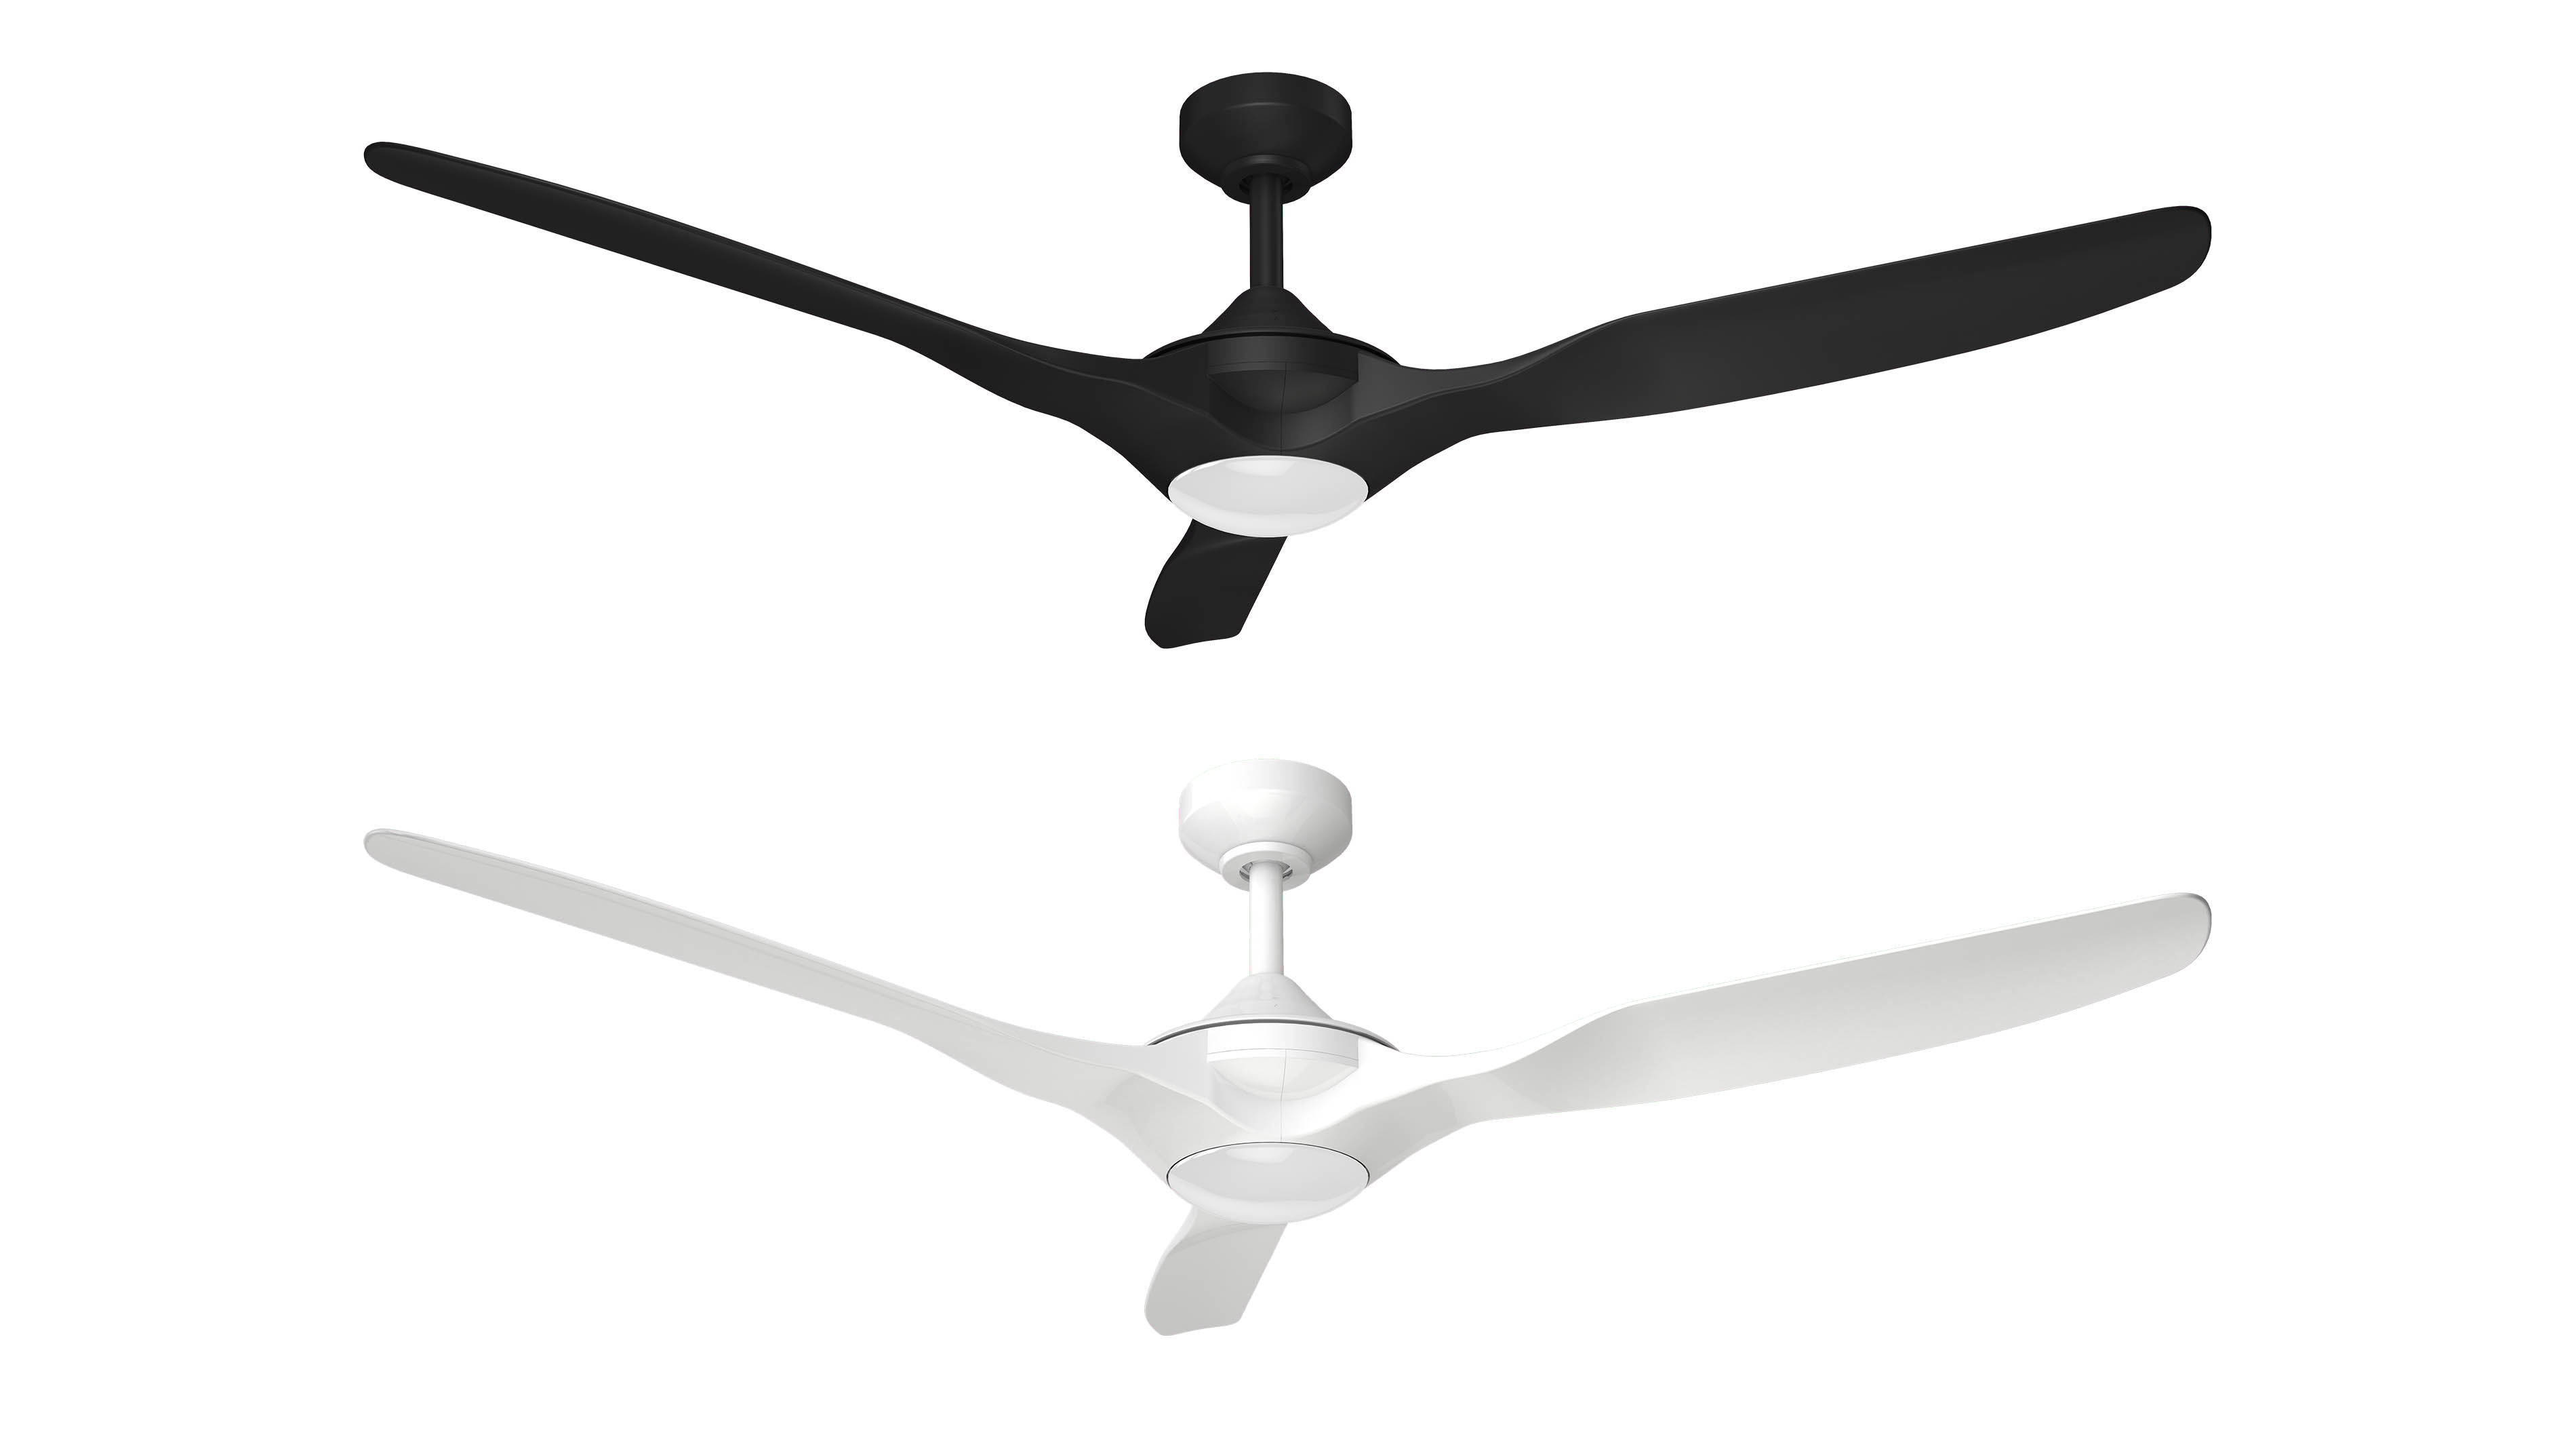 DC Energy-saving Ceiling Fan With Light - VCA G2 Series-DELTA ELECTRONICS, INC.